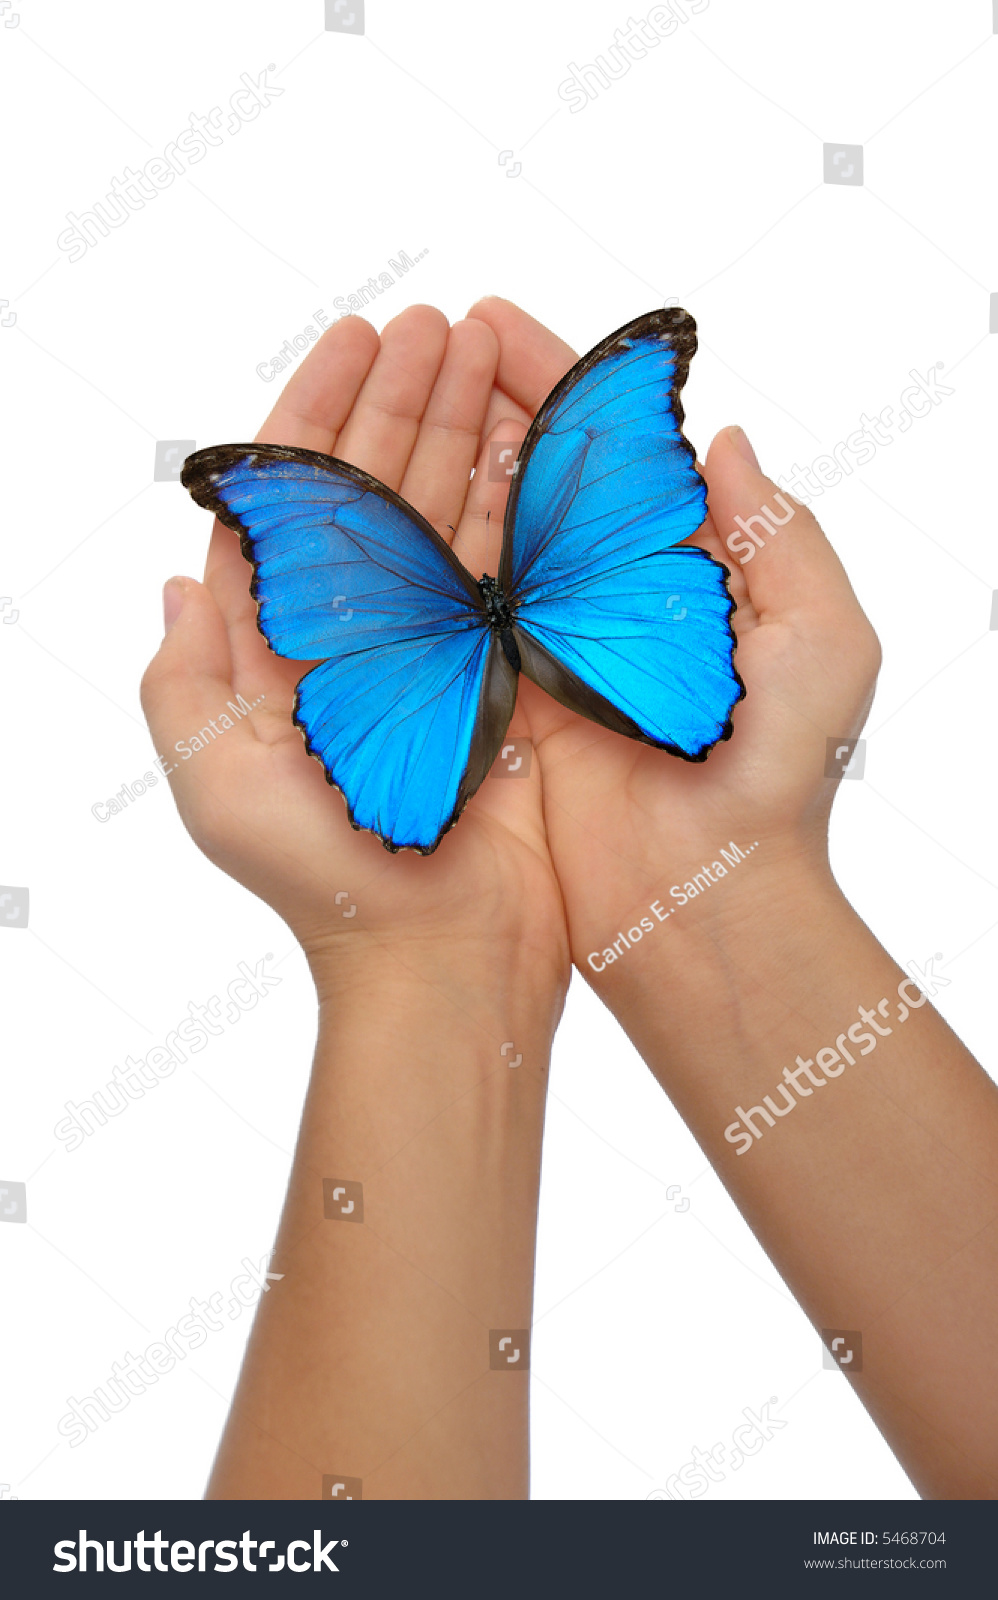 Hands holding a blue butterfly against a white background #5468704